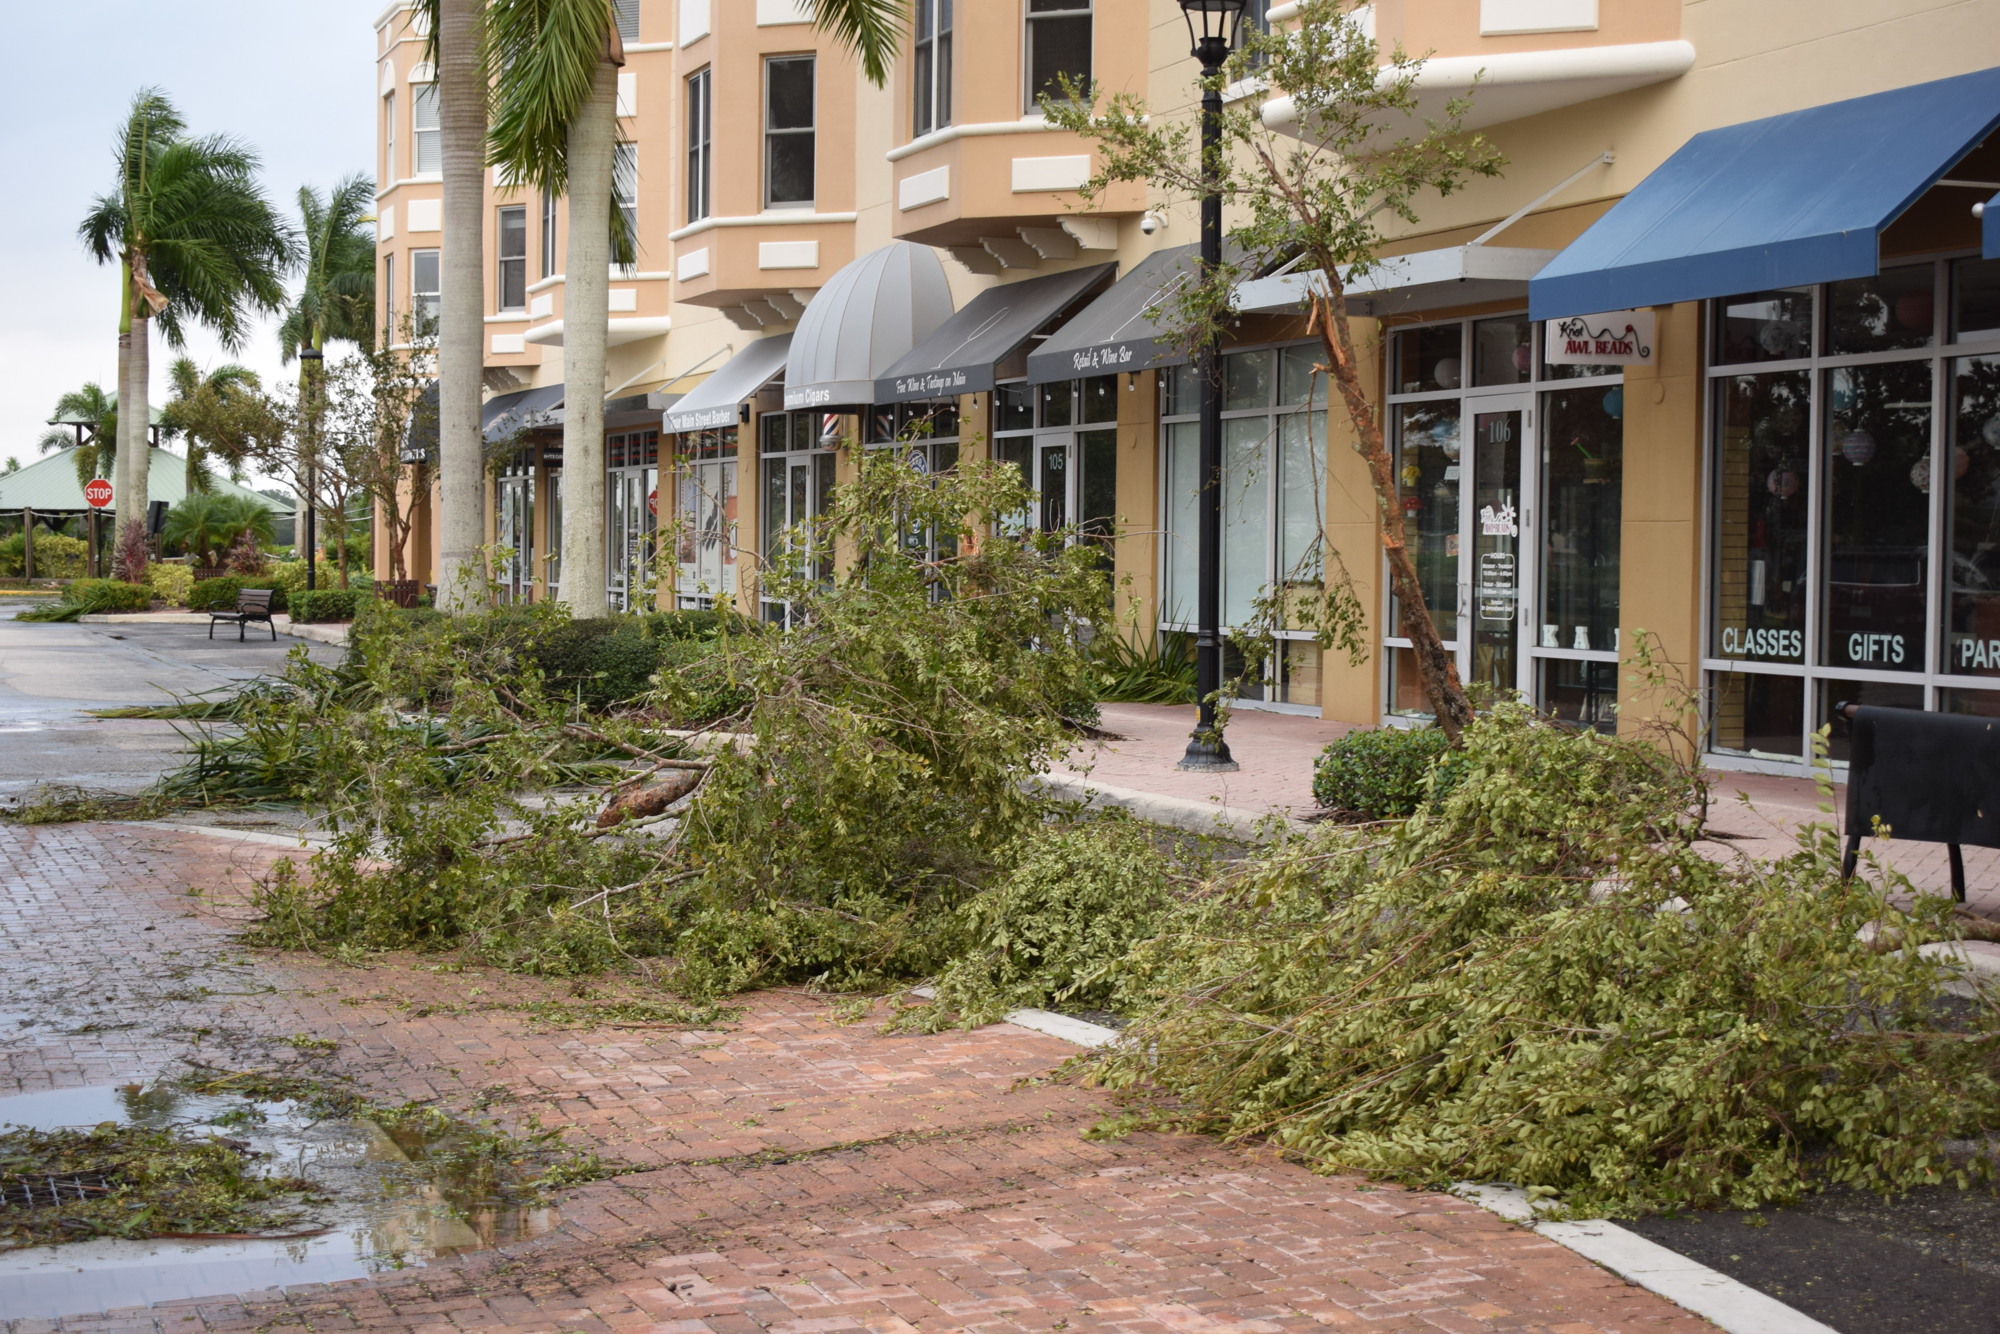 Main Street at Lakewood Ranch only had a bit of minor damage from the storm with mostly tree branches blowing around. (Photo by Jay Heater)